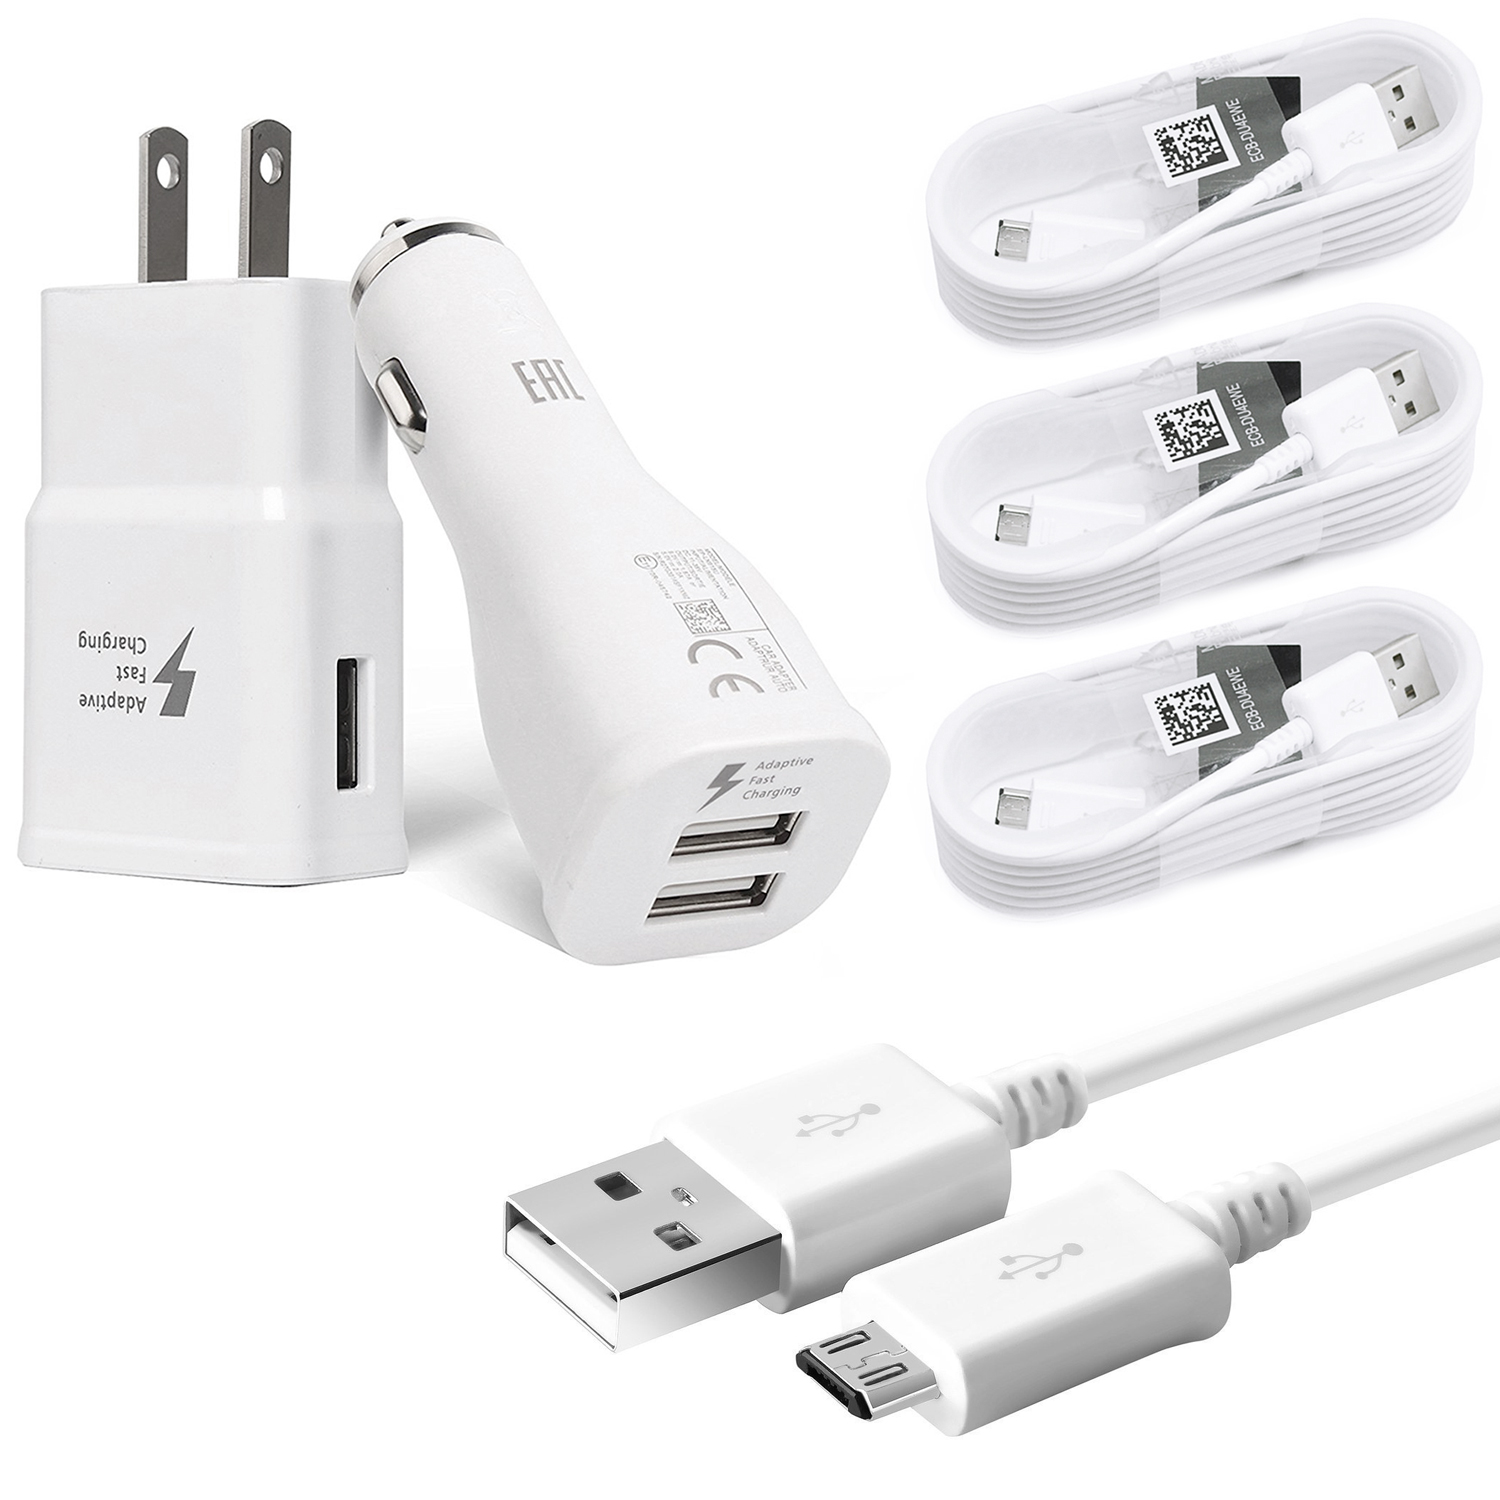 Samsung Galaxy S7, S7 Edge, S6, S6+, S6 Edge+ Adaptive Fast Charger Micro USB 2.0 Cable Kit Fast Charging USB Wall Charger & Car Charger [1 USB Car Charger + 1 Wall Charger + 3x 5 FT Micro USB Cable] - image 1 of 9